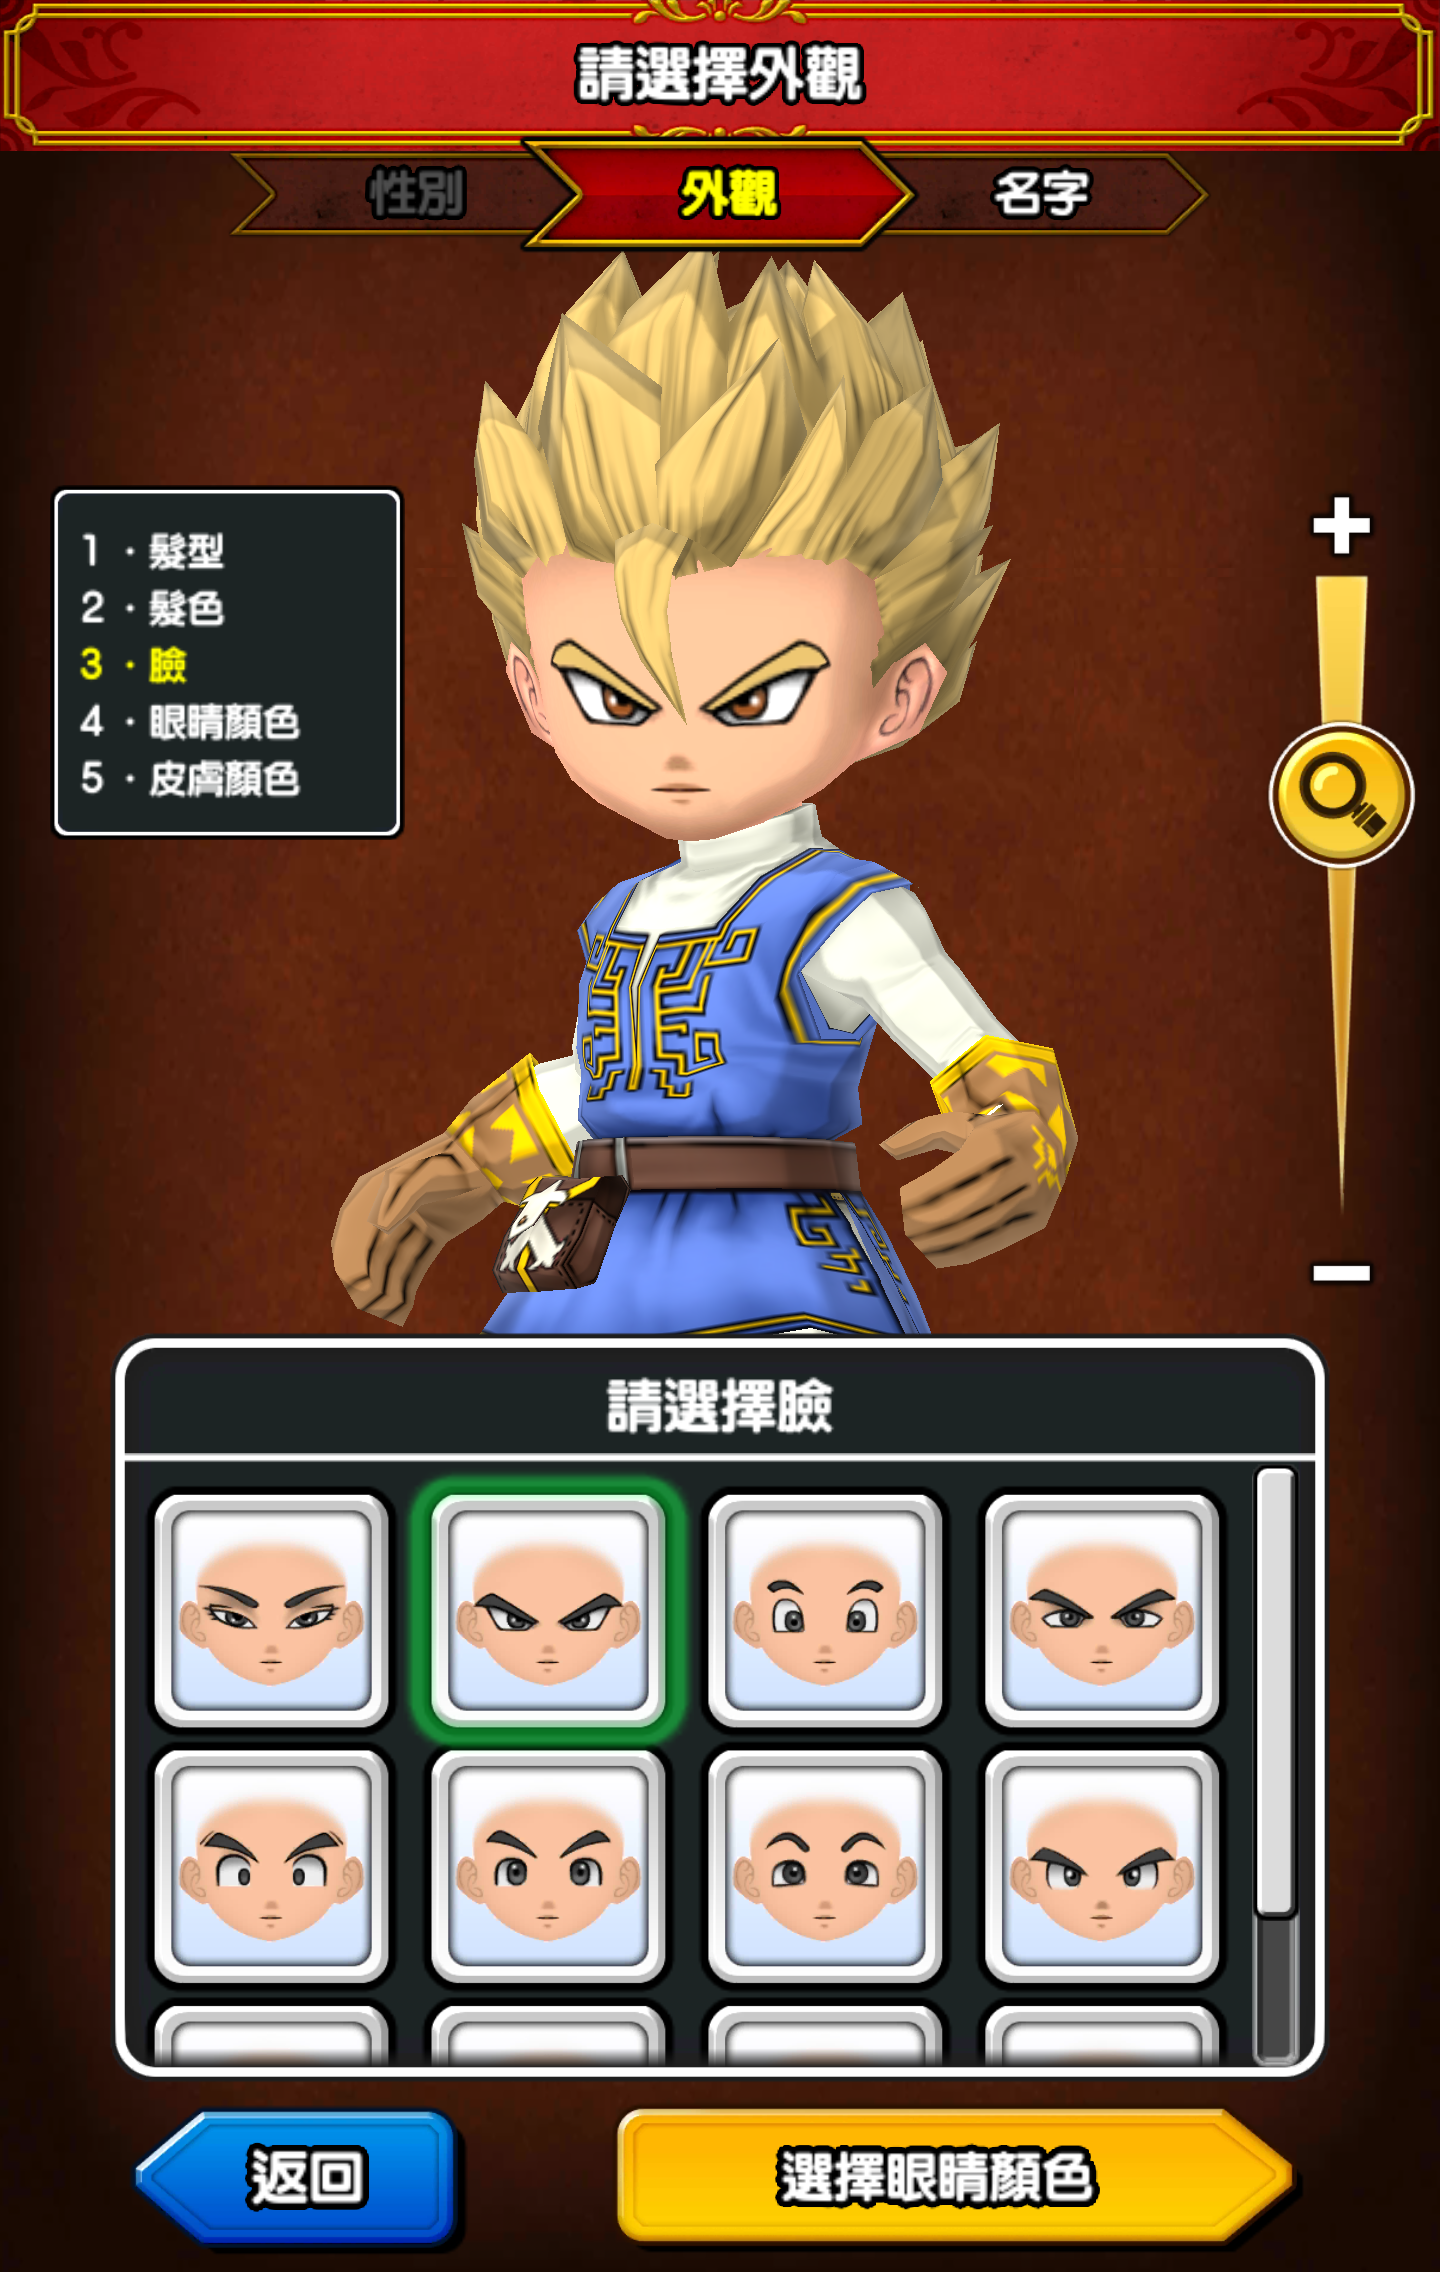 Screenshot 1 of DRAGON QUEST OF THE STARS 1.2.40